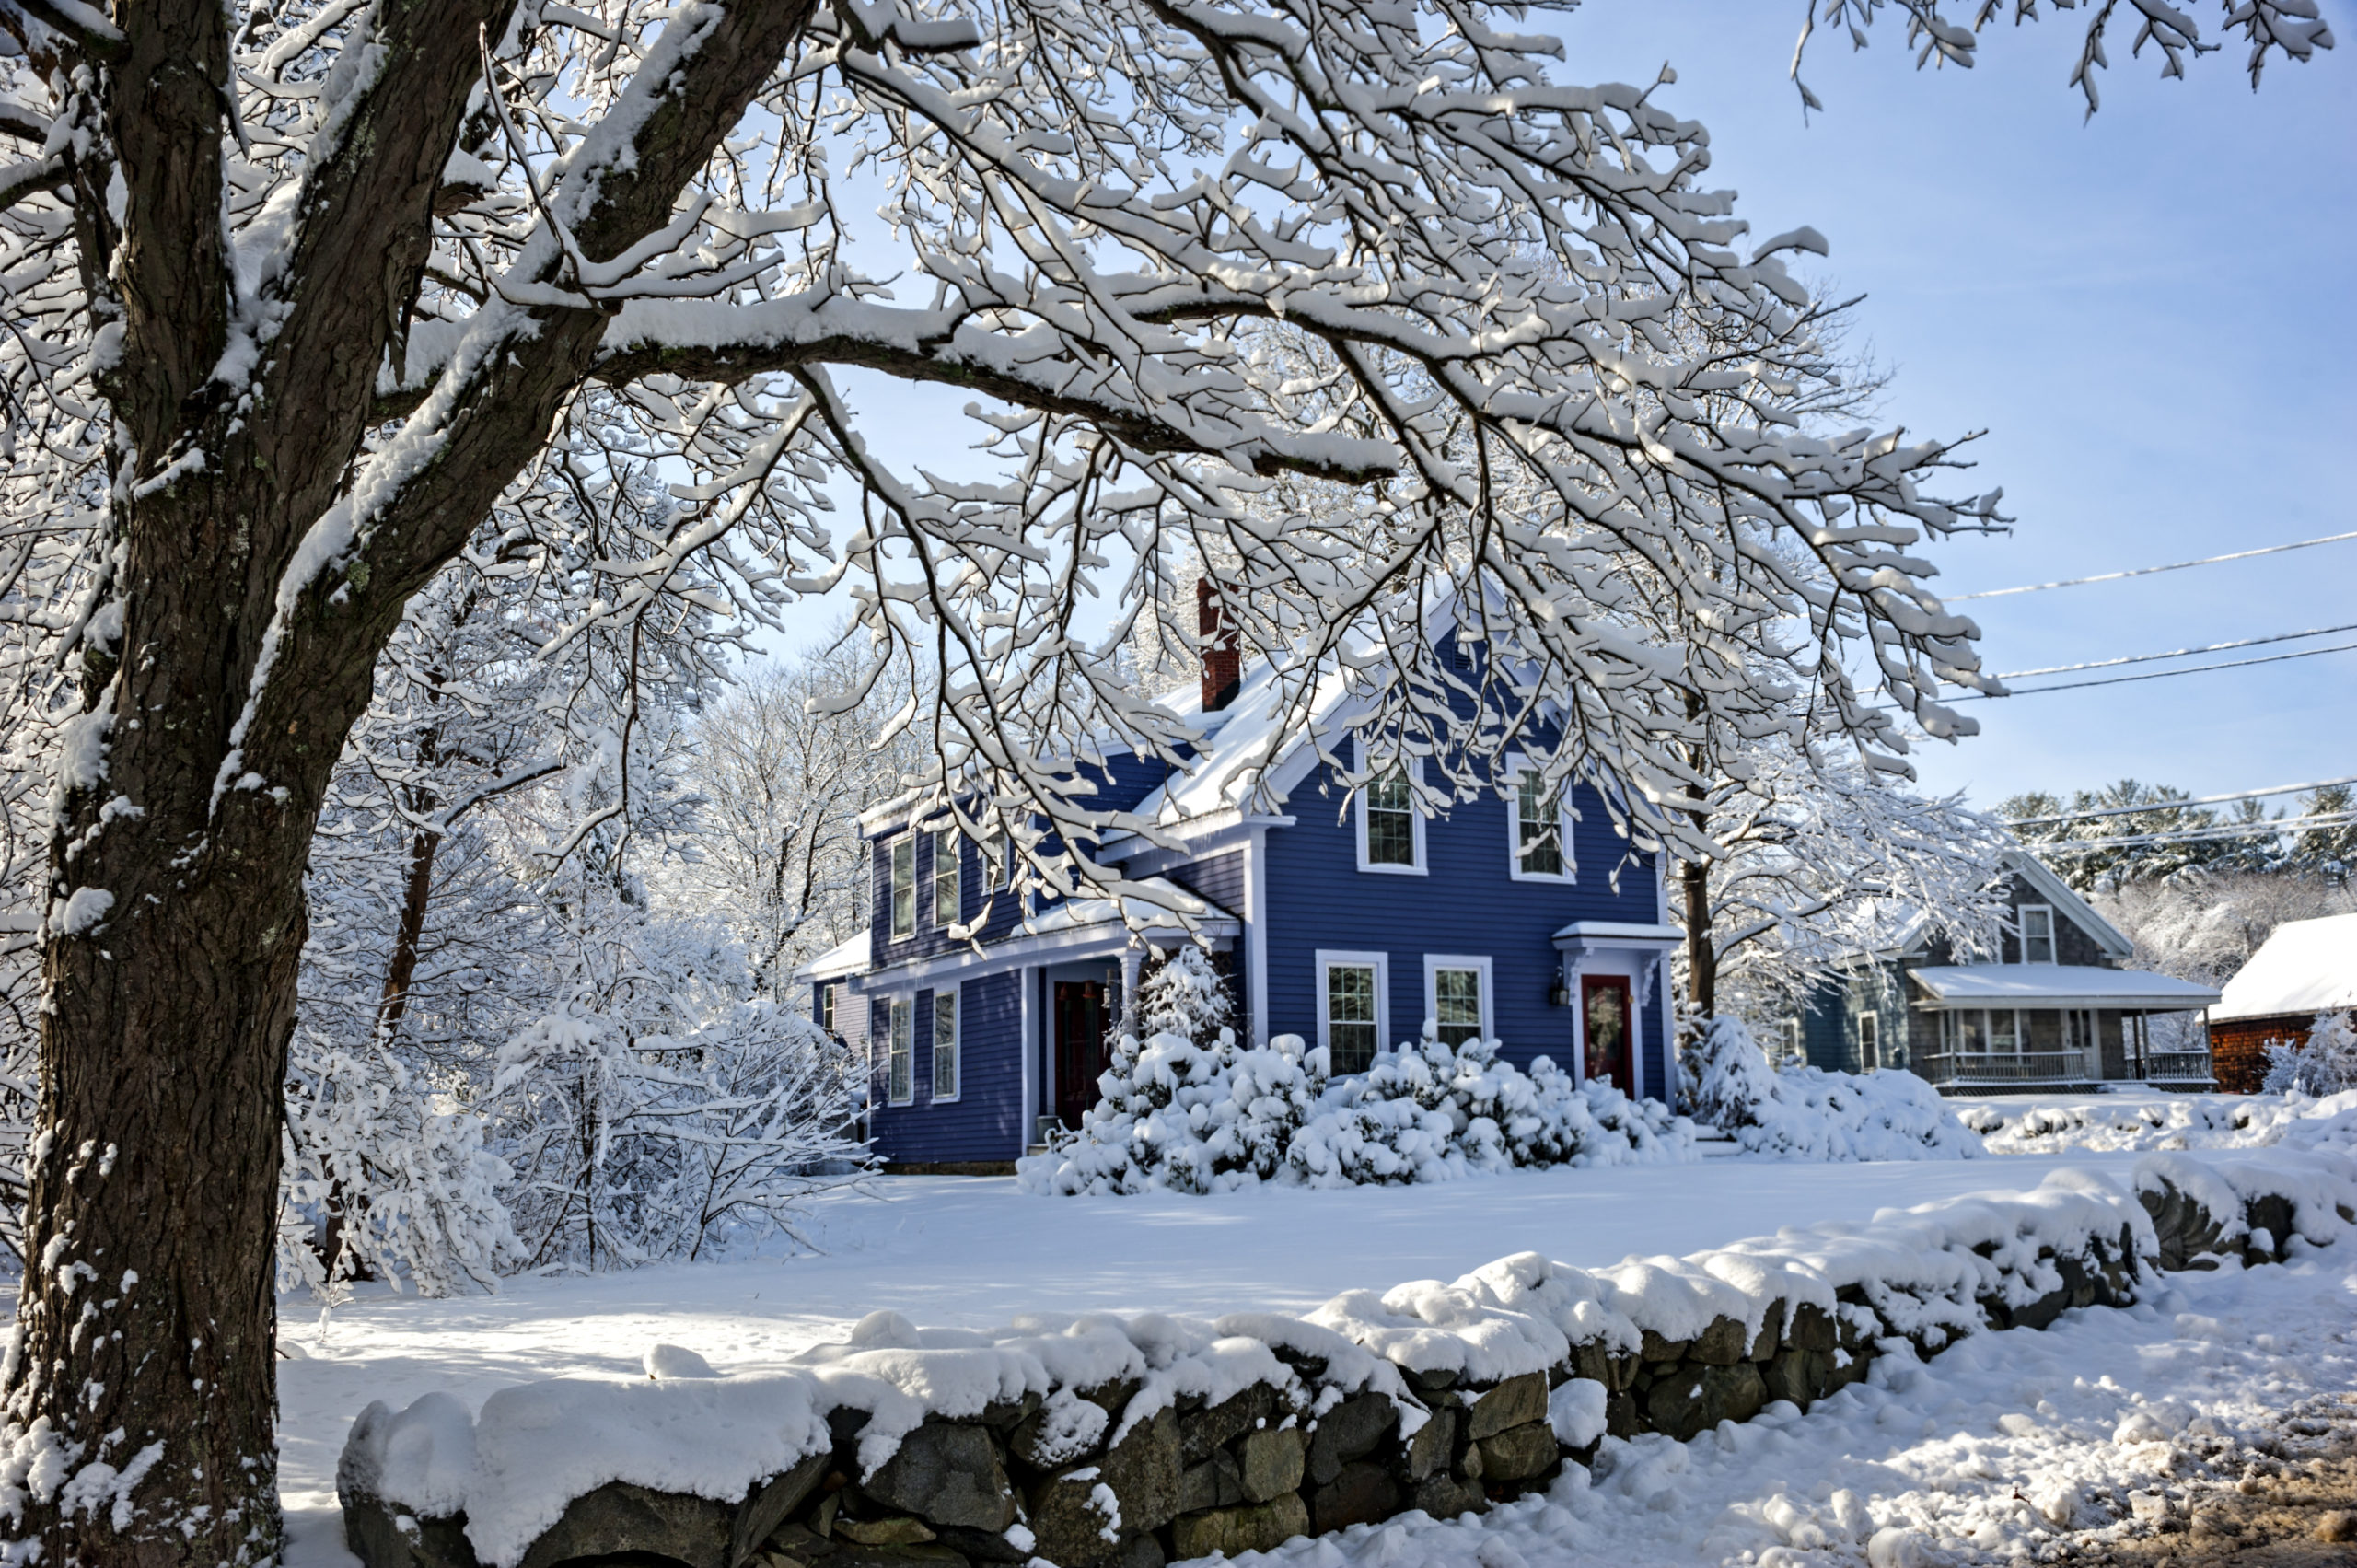 winter weather new england february power outage causes home residential standby generator